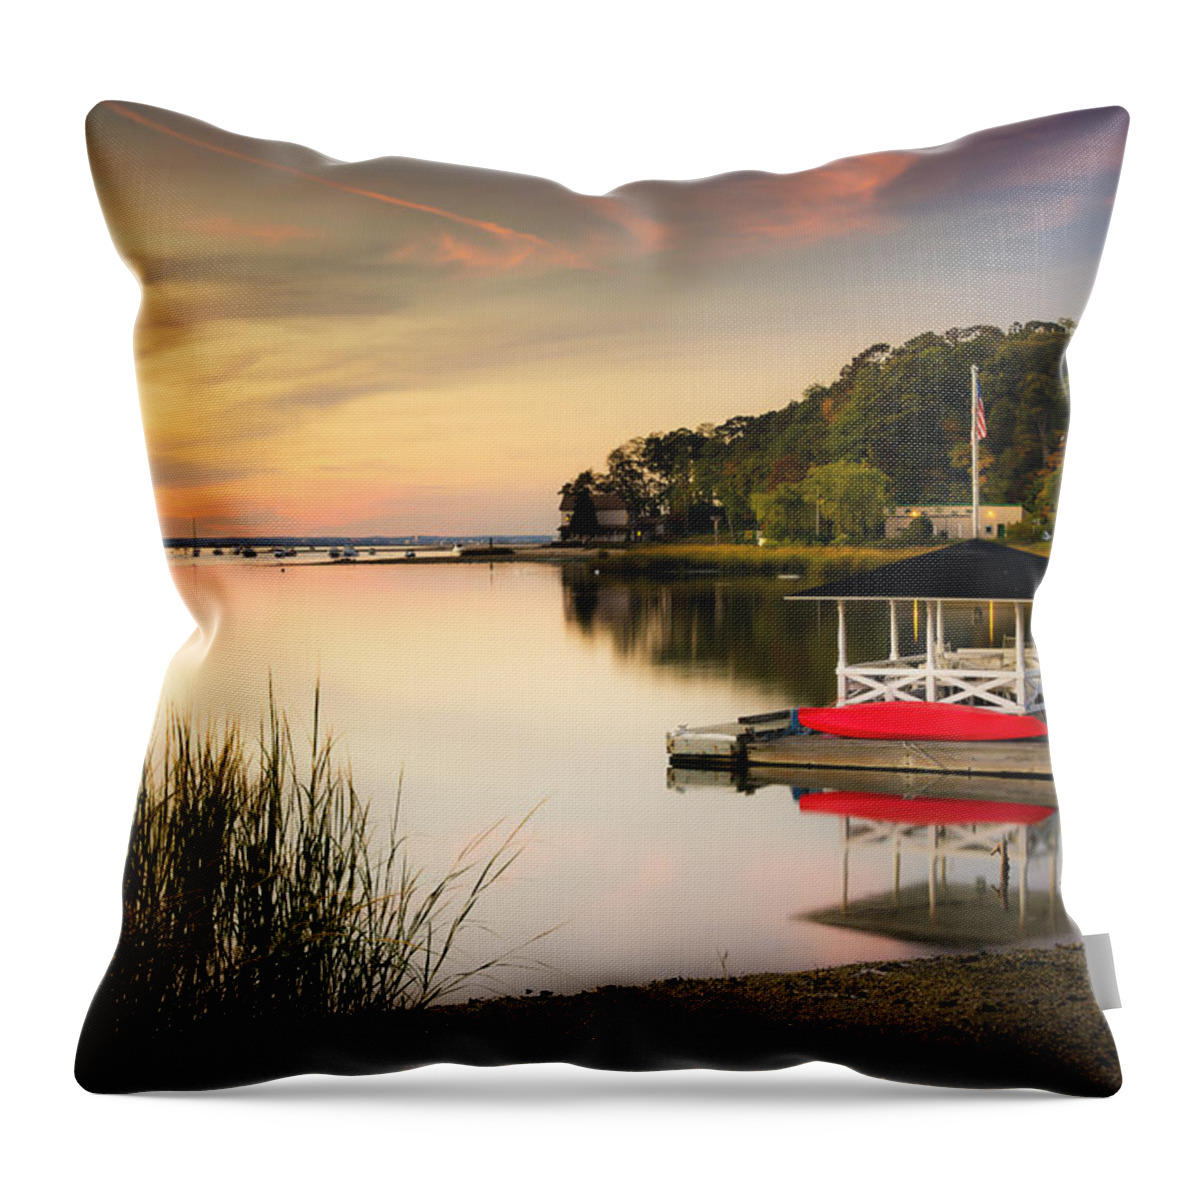 Sunset Throw Pillow featuring the photograph Sunset in Centerport by Alissa Beth Photography